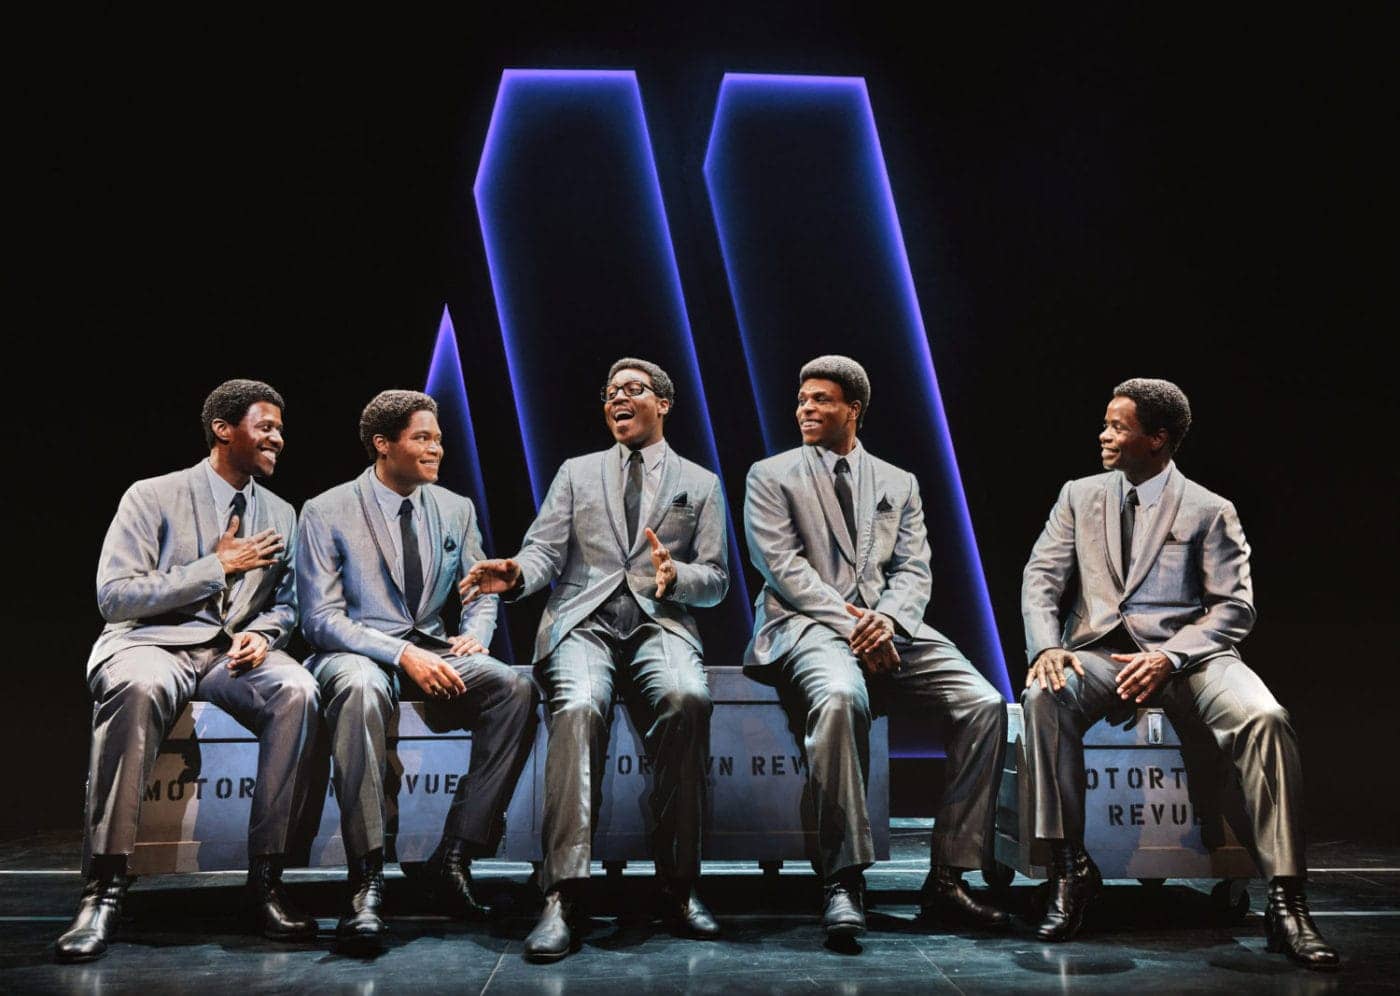 Aint-Too-Proud-cast-122122-1400x996, <strong>The Temptations are golden</strong>, Culture Currents Local News & Views News & Views 